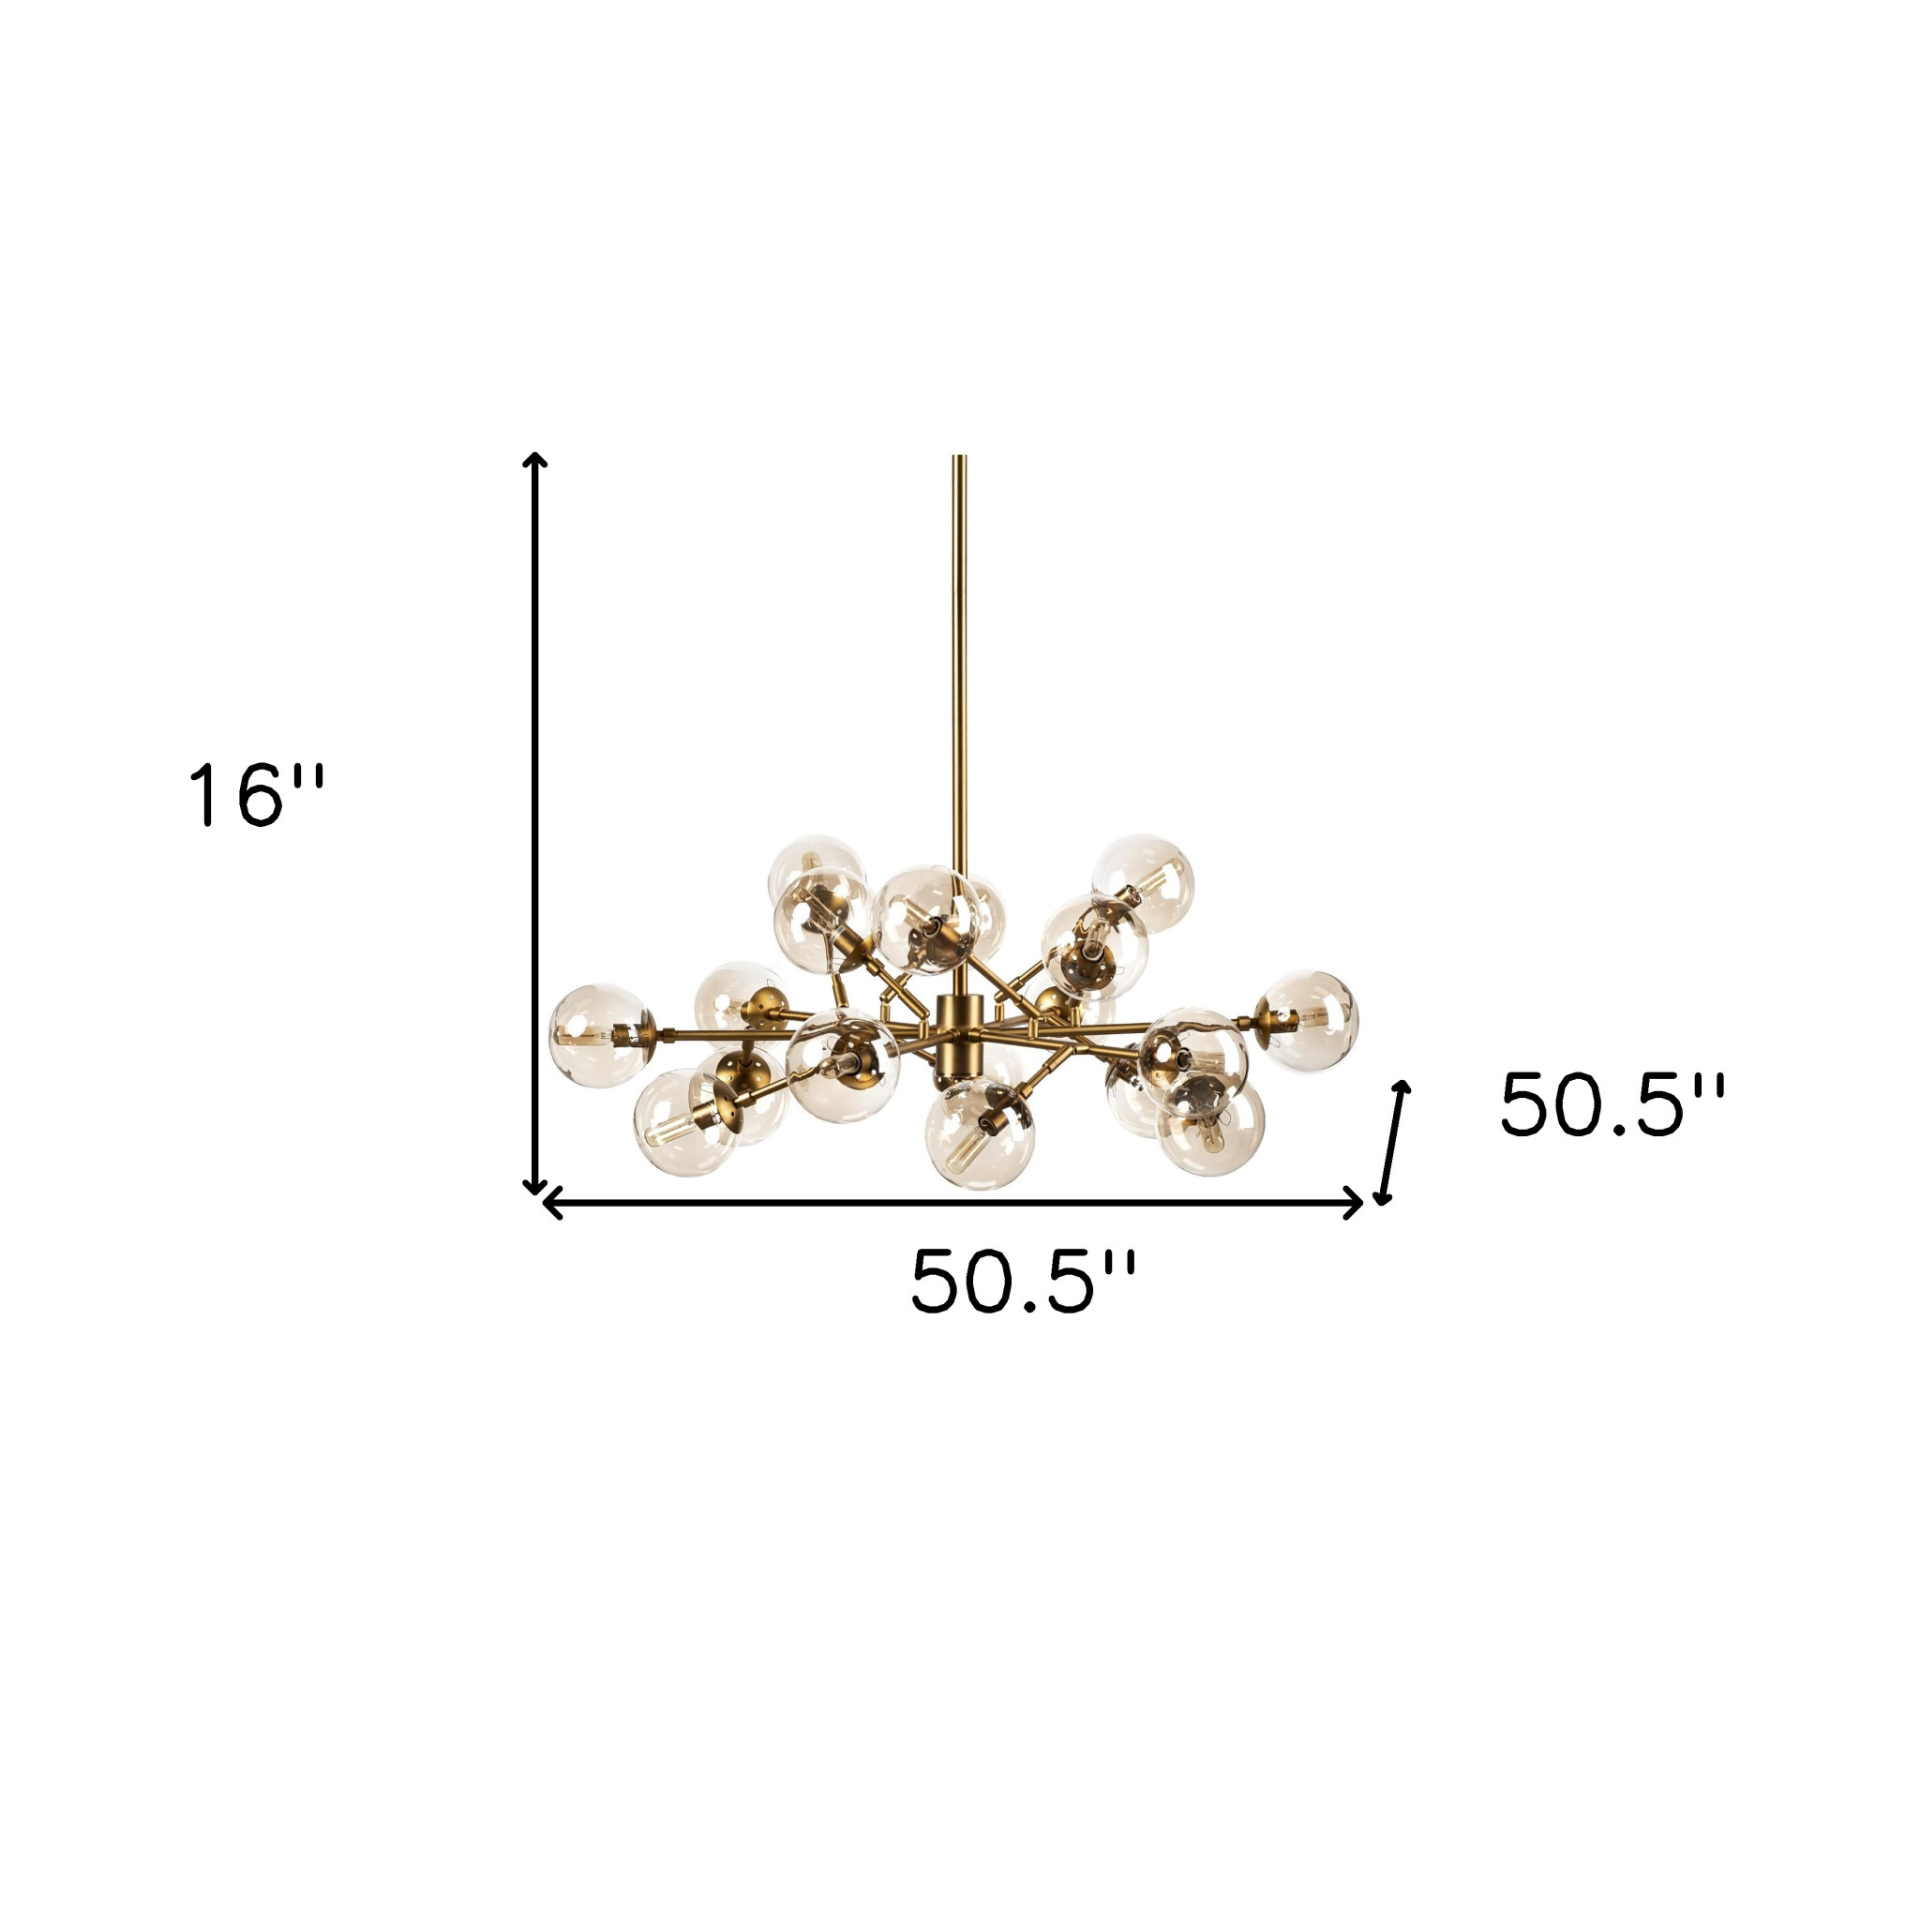 Gold - Contemporary Eighteen Bulb Hanging Chandelier (50.5"W x 16.0"H)